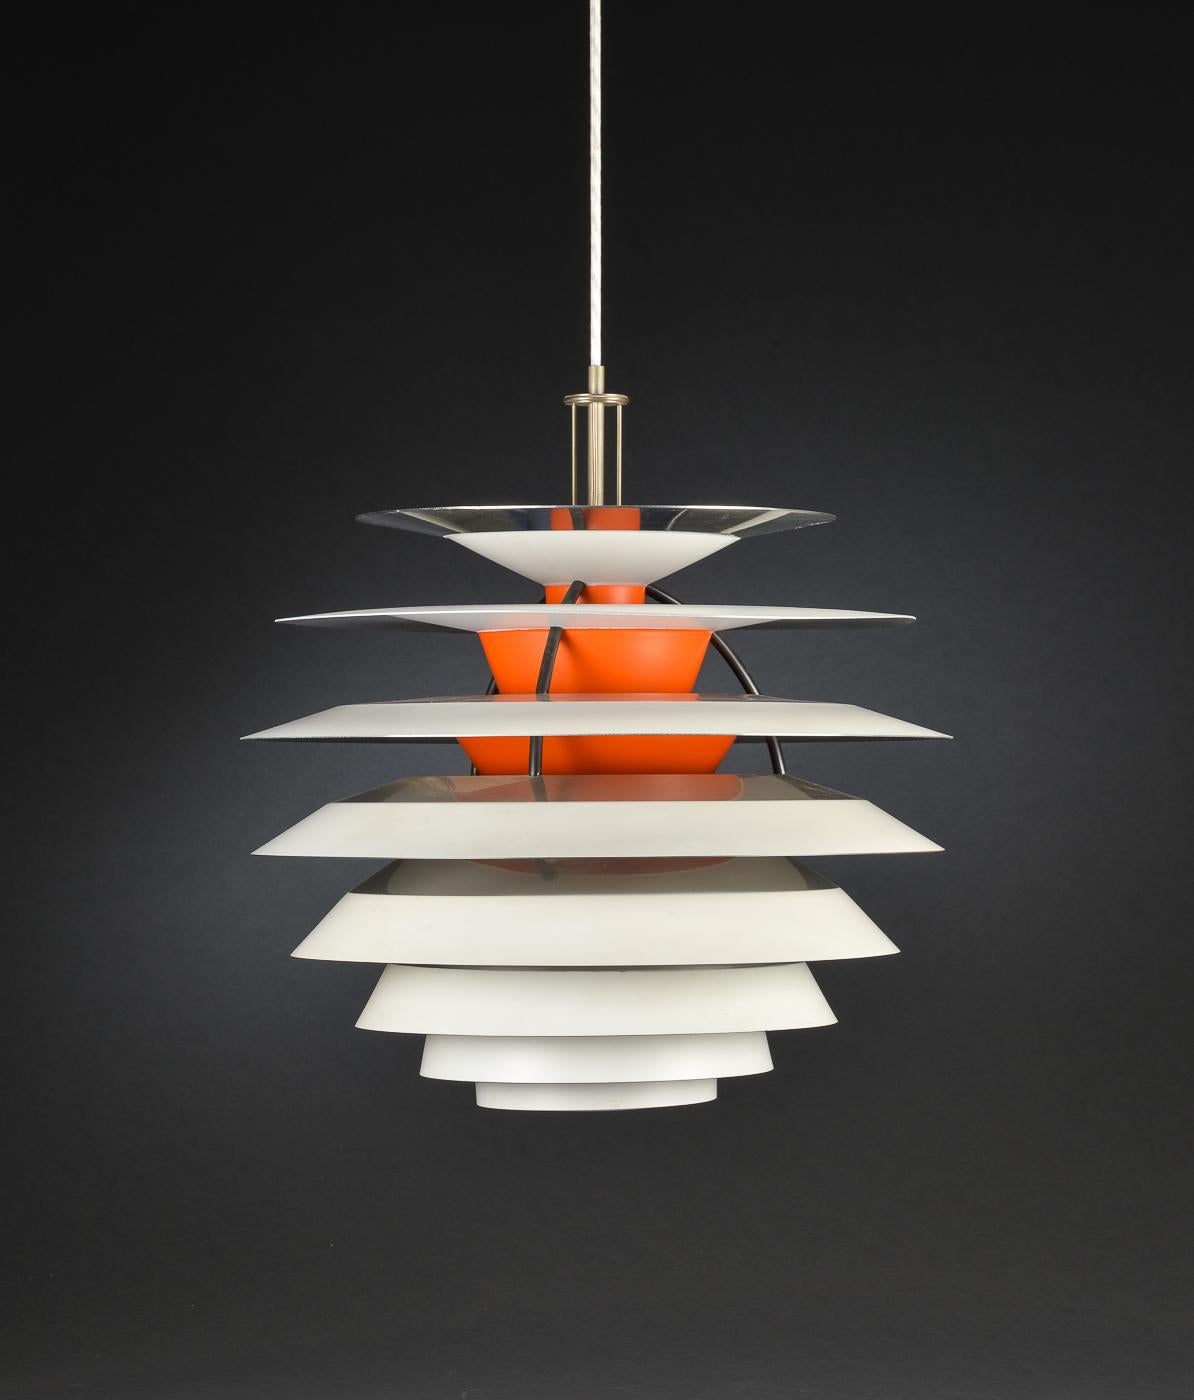 Poul Henningsen. ‘Kontrast’ lamp fitted with 10 shades, each with four different surfaces, adjustable pendant tube for adjustment of contrast lighting, fitted with fabric cord.
The lightbulb inside the lamp can be moved up and down. This ability to